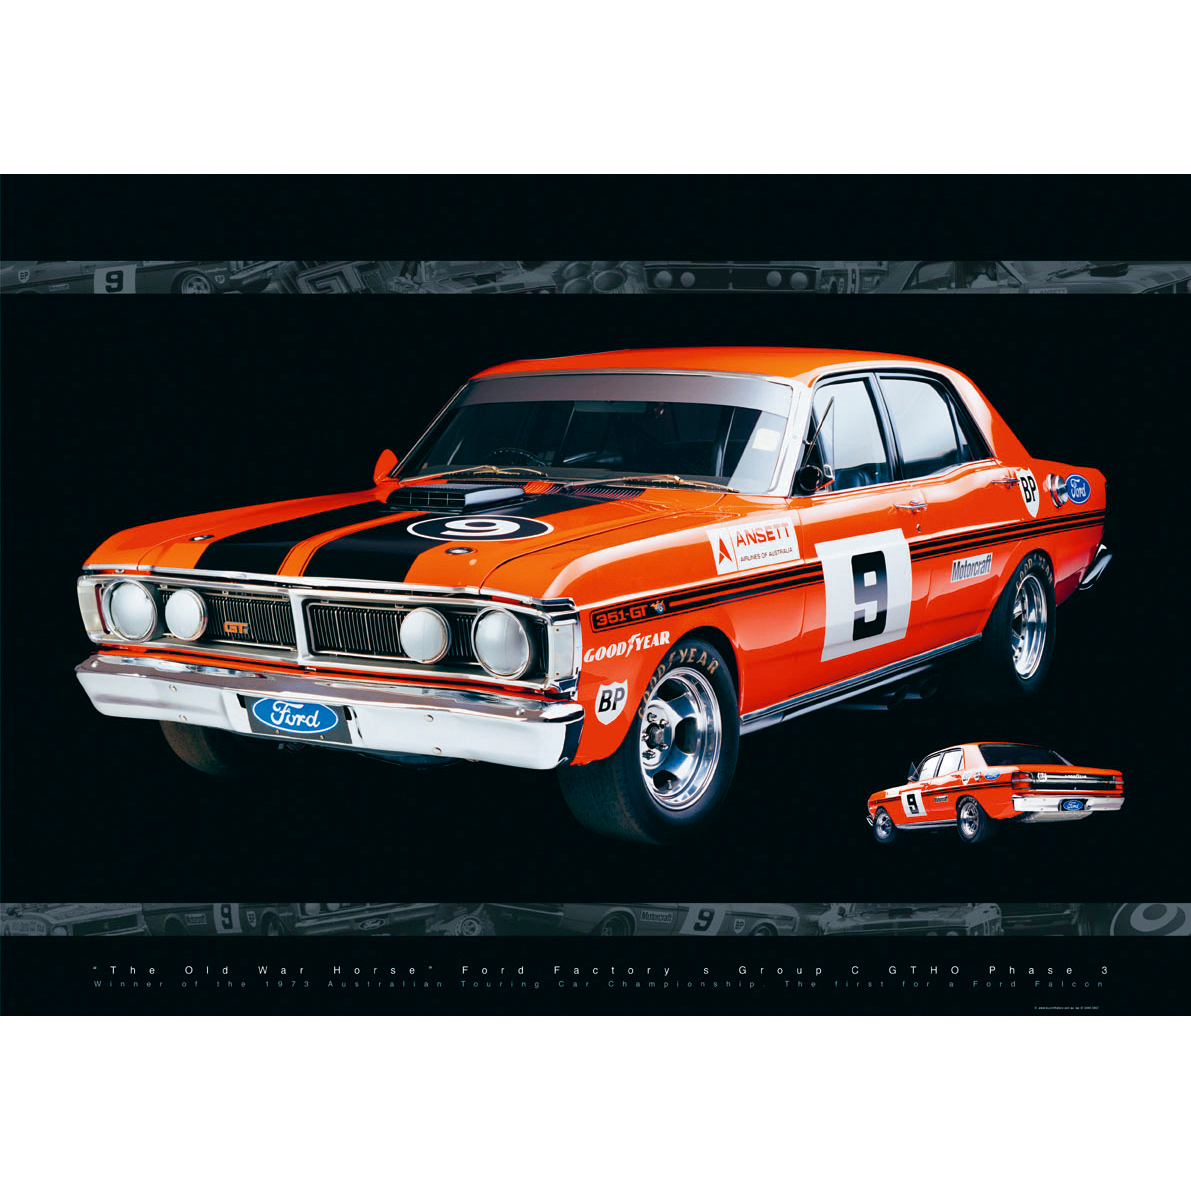 1973 Moffat GTHO Phase 3 - Poster